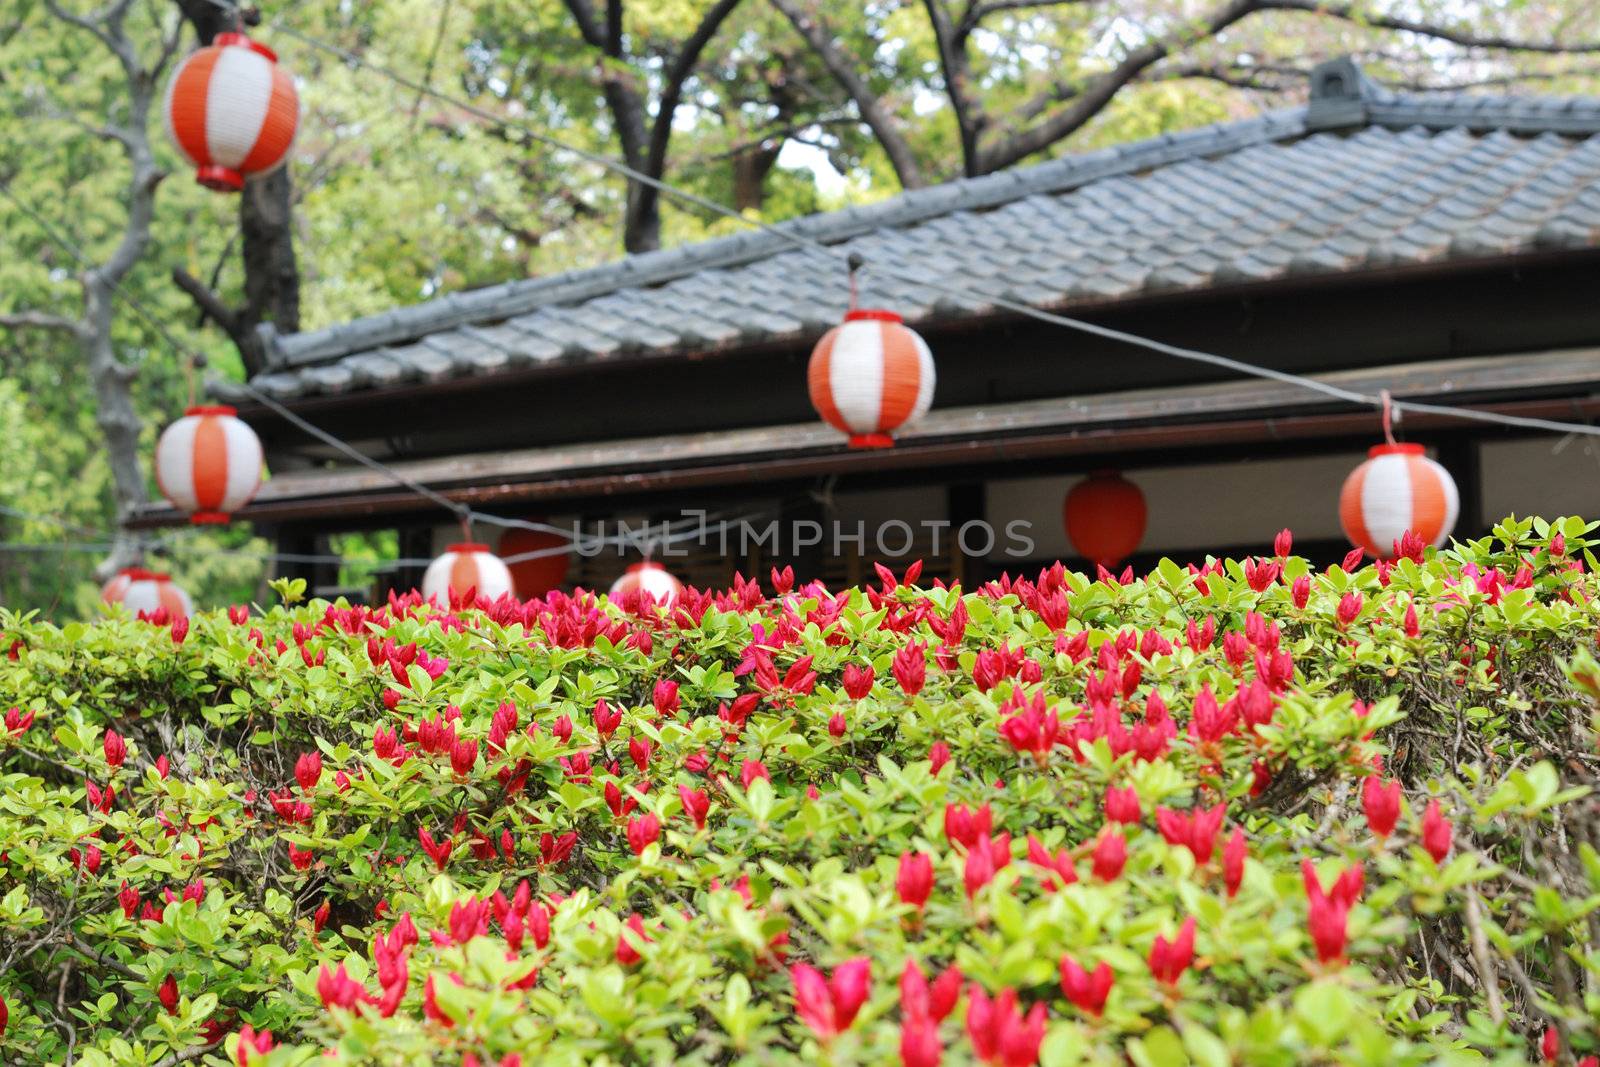 blossom azalea bushes in the yard of Japanese temple; focus on central part of the bush